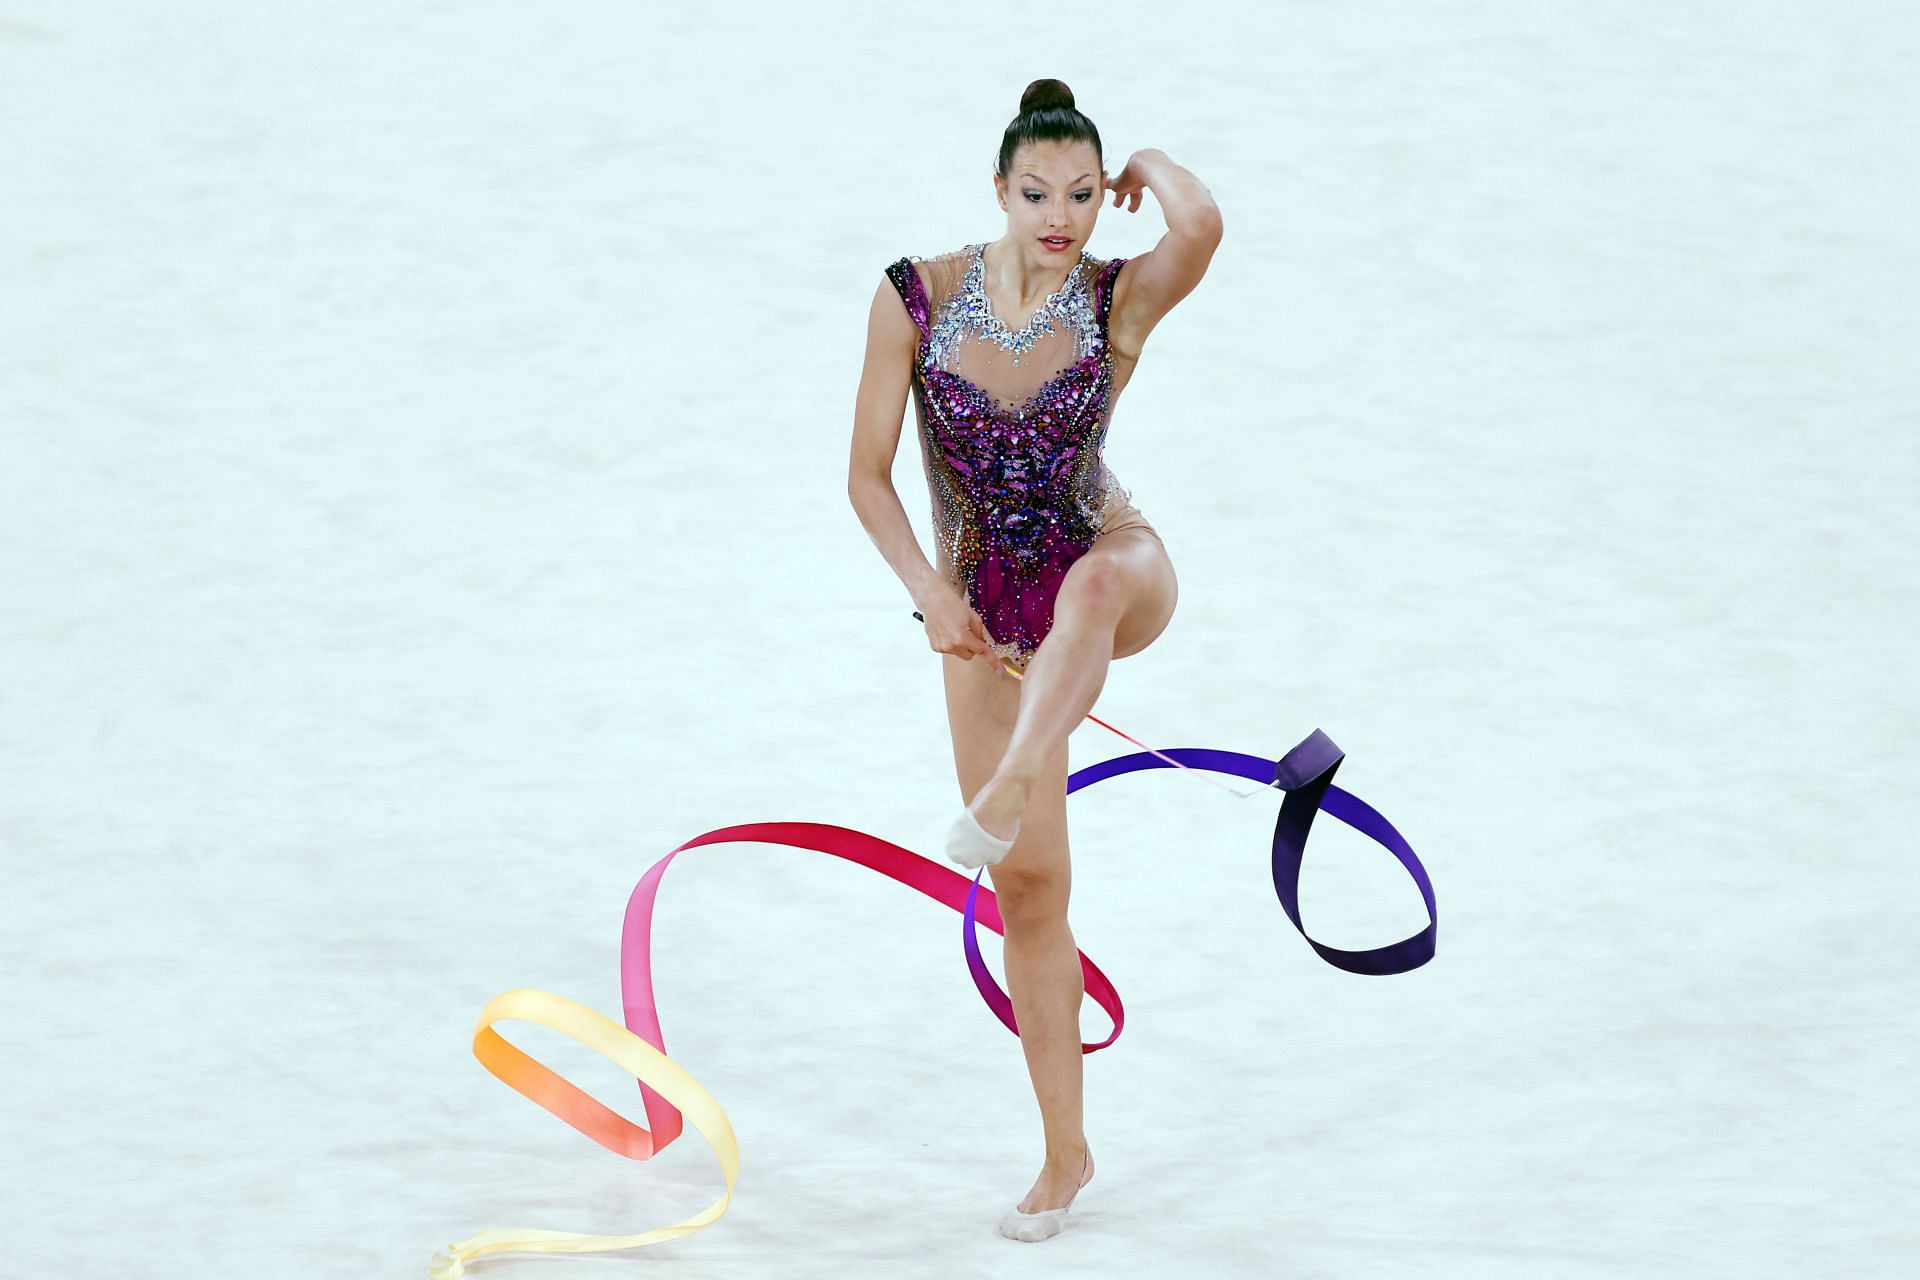 Evita Griskenas Competed during the All-Around Qualifications round at the 2020 Tokyo Olympics in Tokyo, Japan